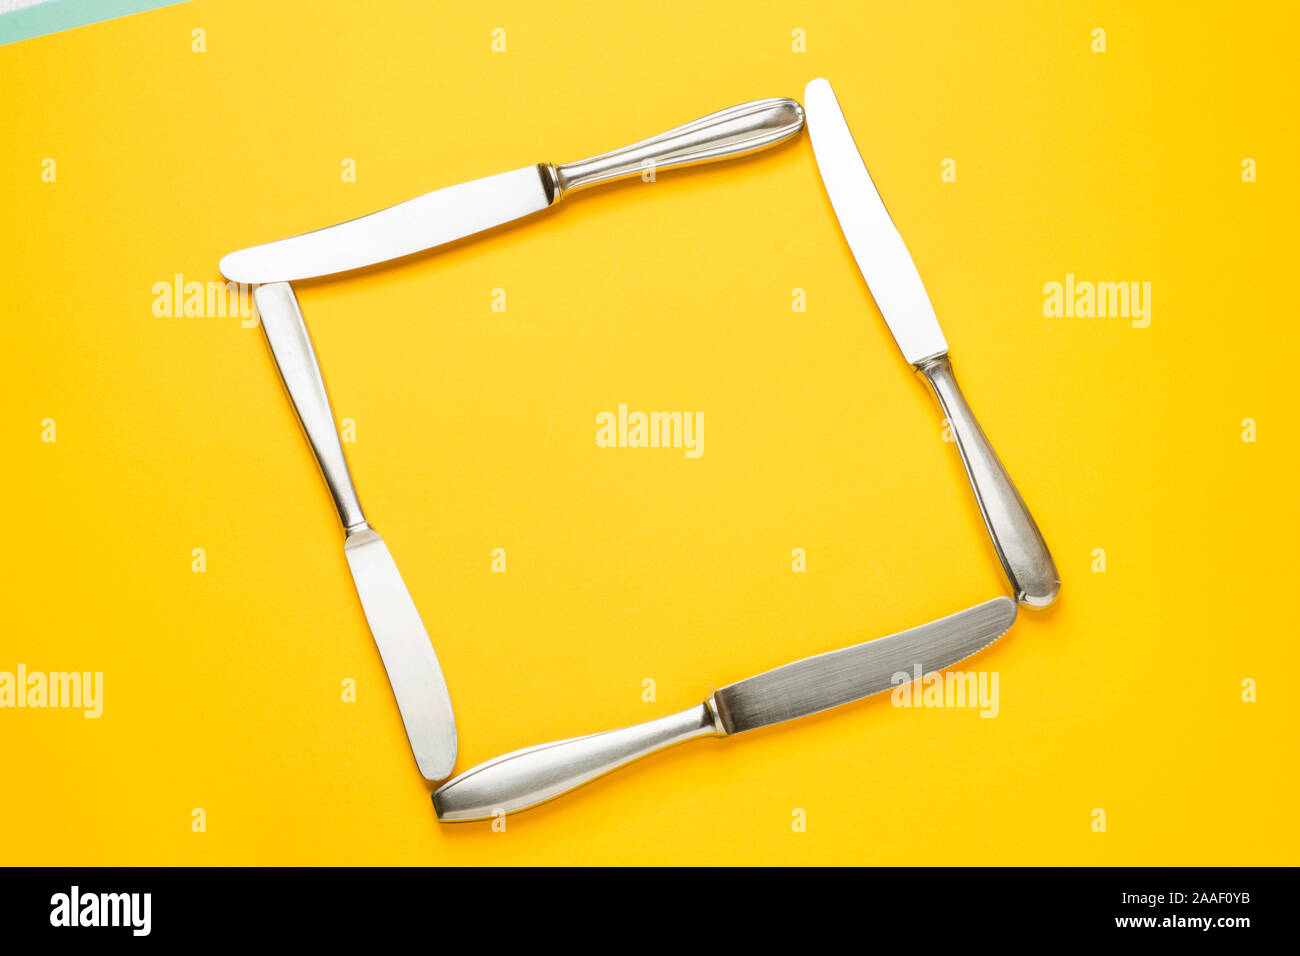 Creative layout frame made of decorative set of knifes on a yellow background. Flat lay. Food concept. Lunch time. Stock Photo